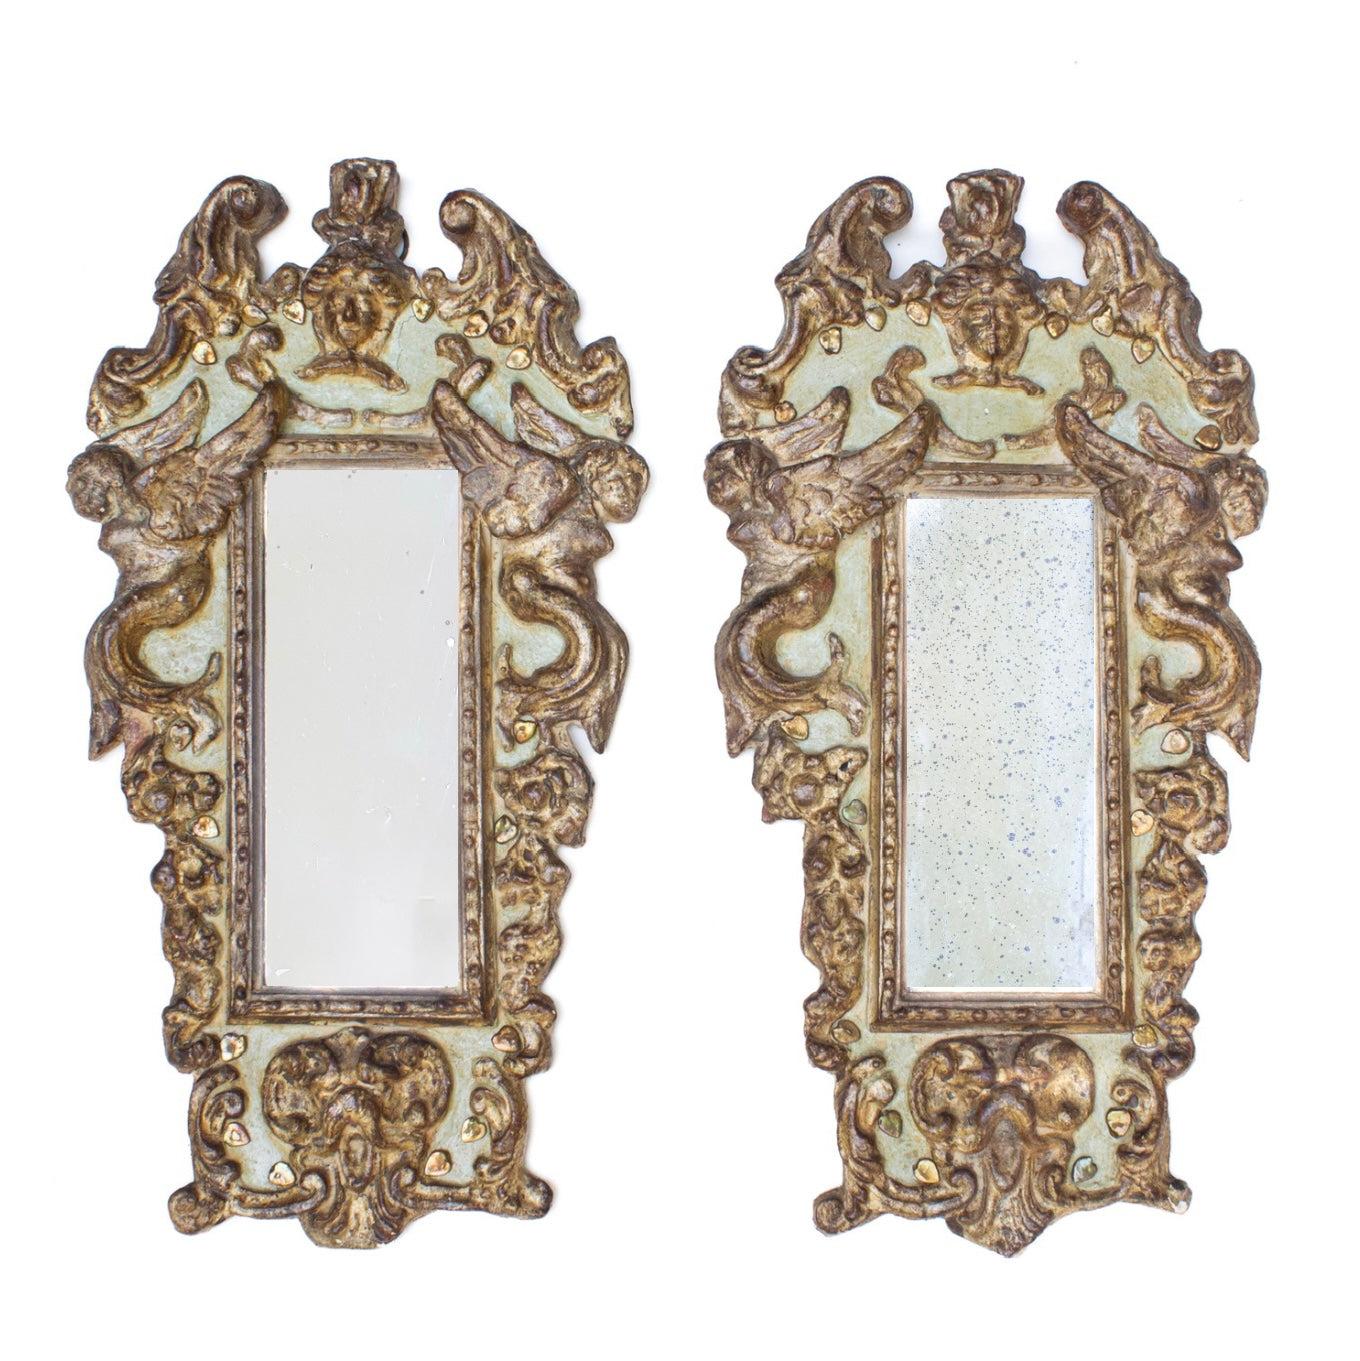 Pair of 18th century Italian green and gilded cherub mirrors. The mirrors have been hand-carved and molded with each cherub unique unto itself. The mirrors are originally from Florence, Italy and are adorned with heart-shaped baroque pearls that